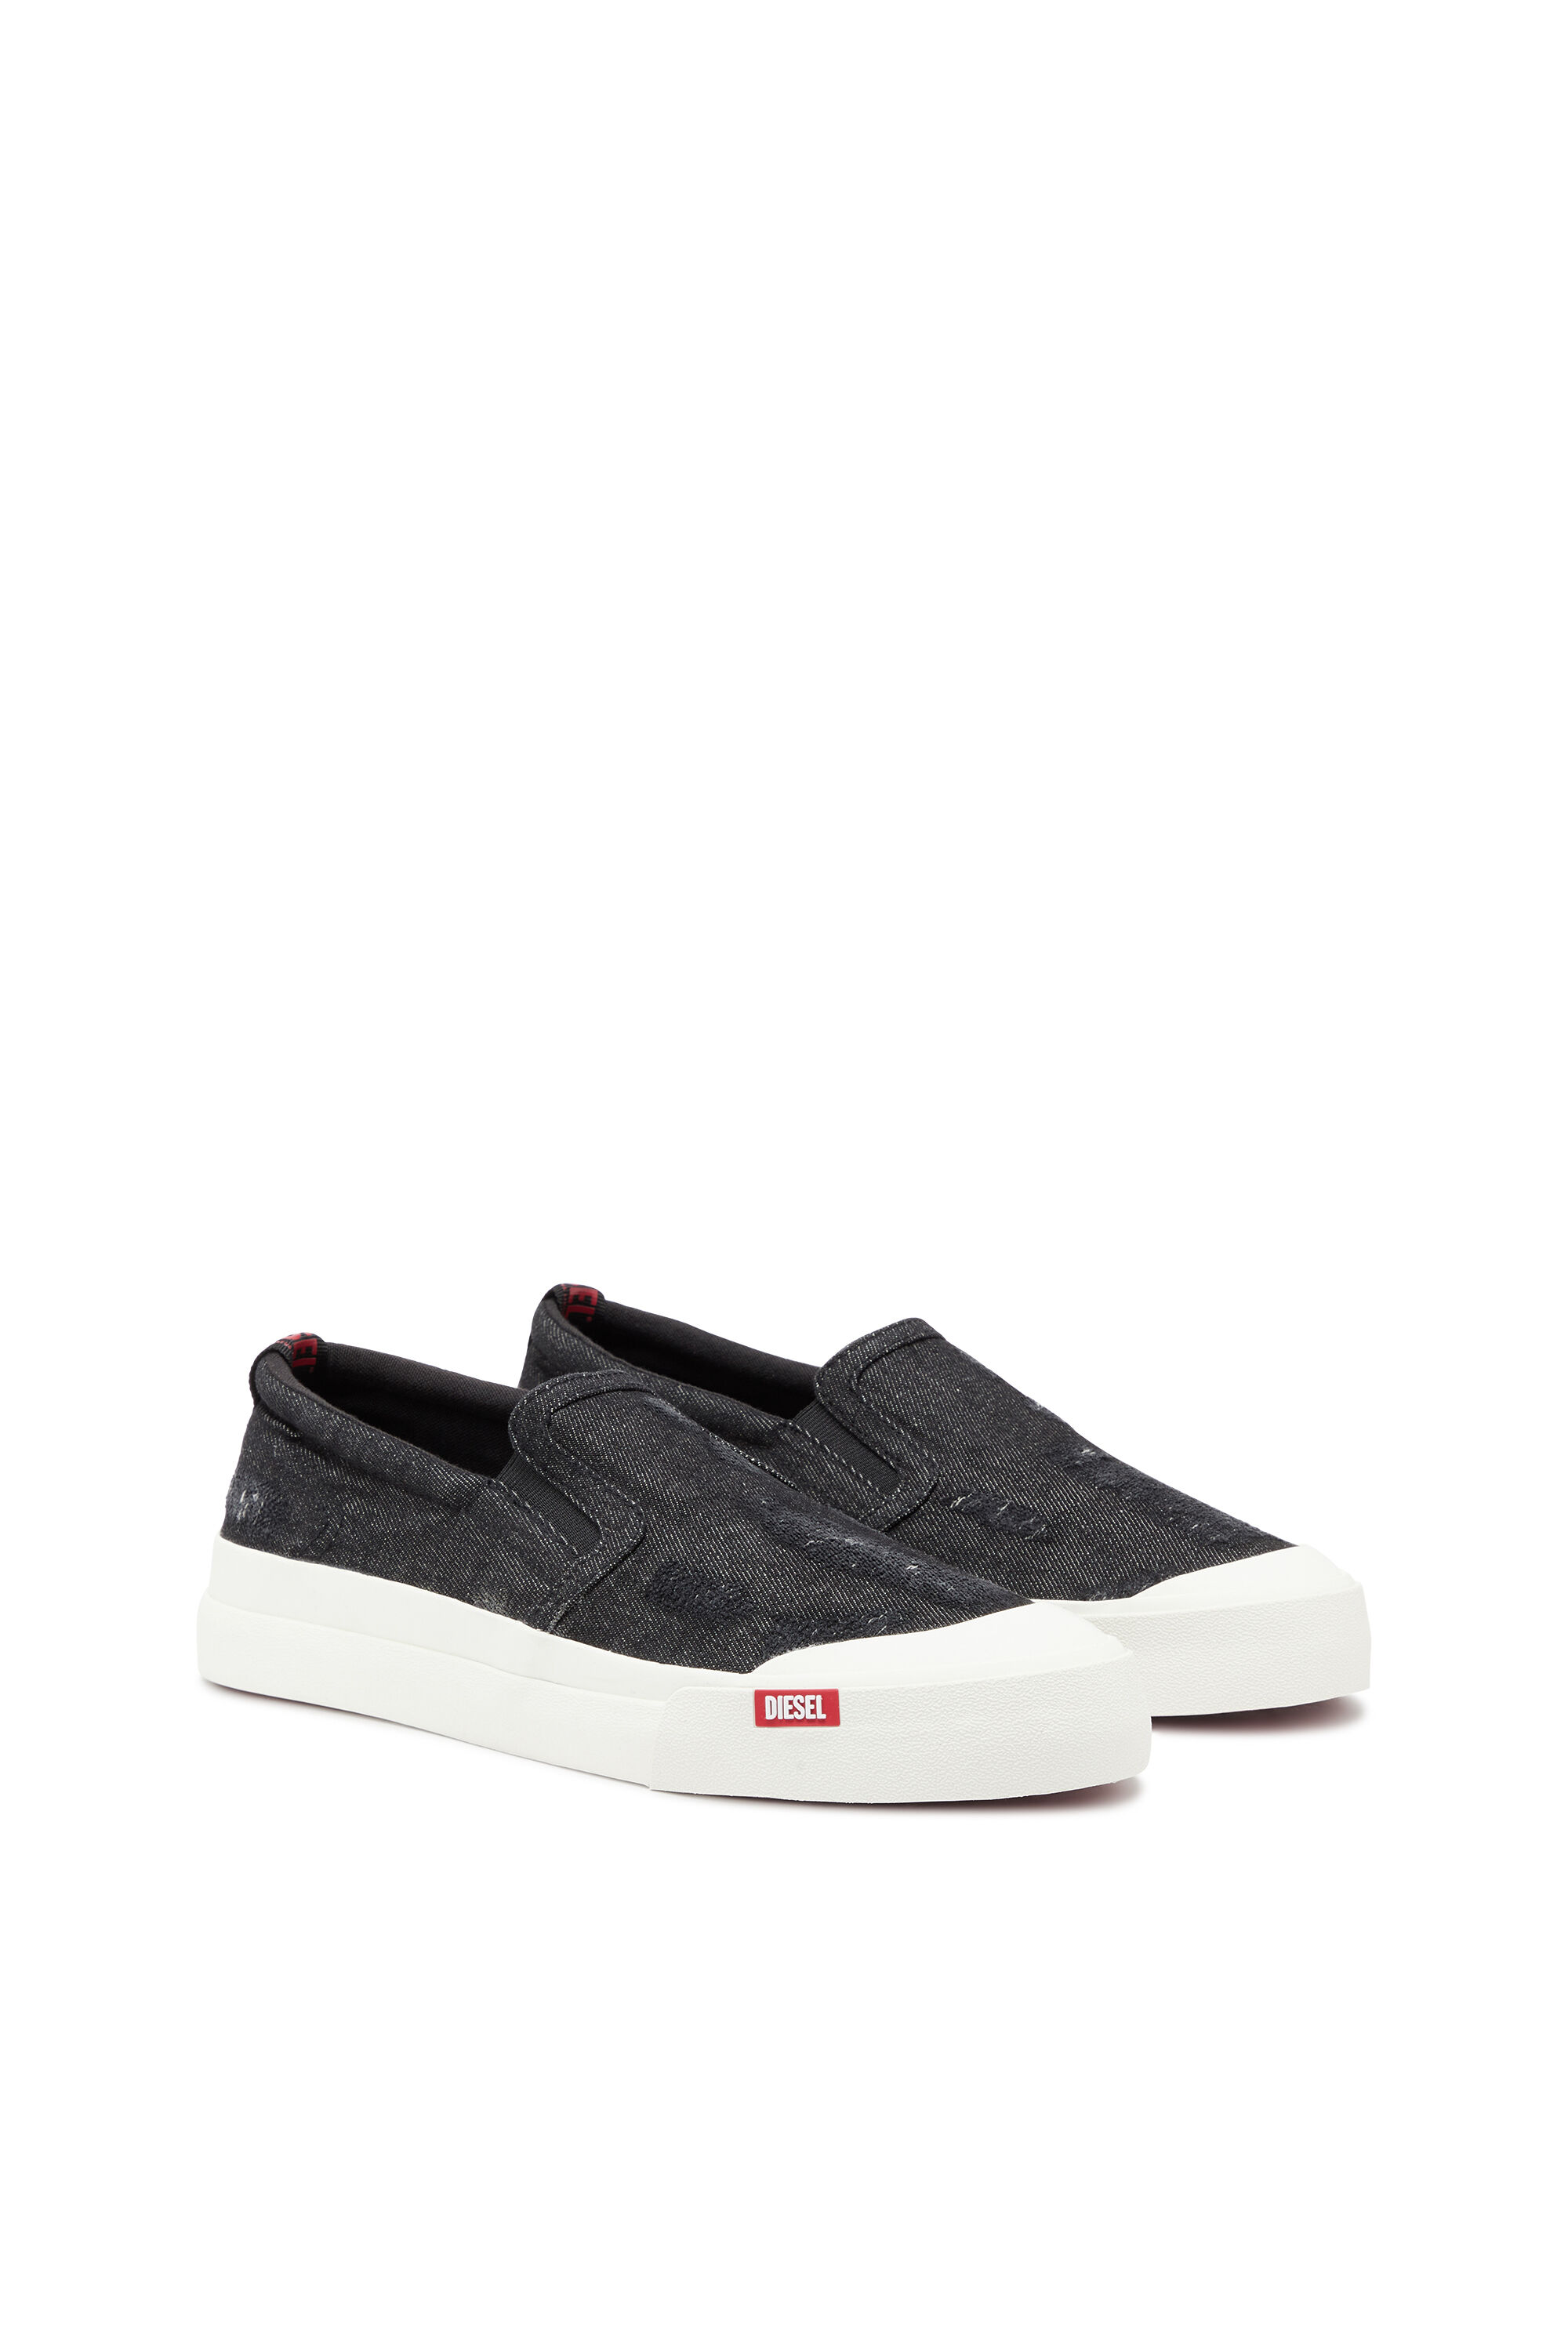 S-ATHOS SLIP ON S-Athos Slip On - Slip-on sneakers in distressed 